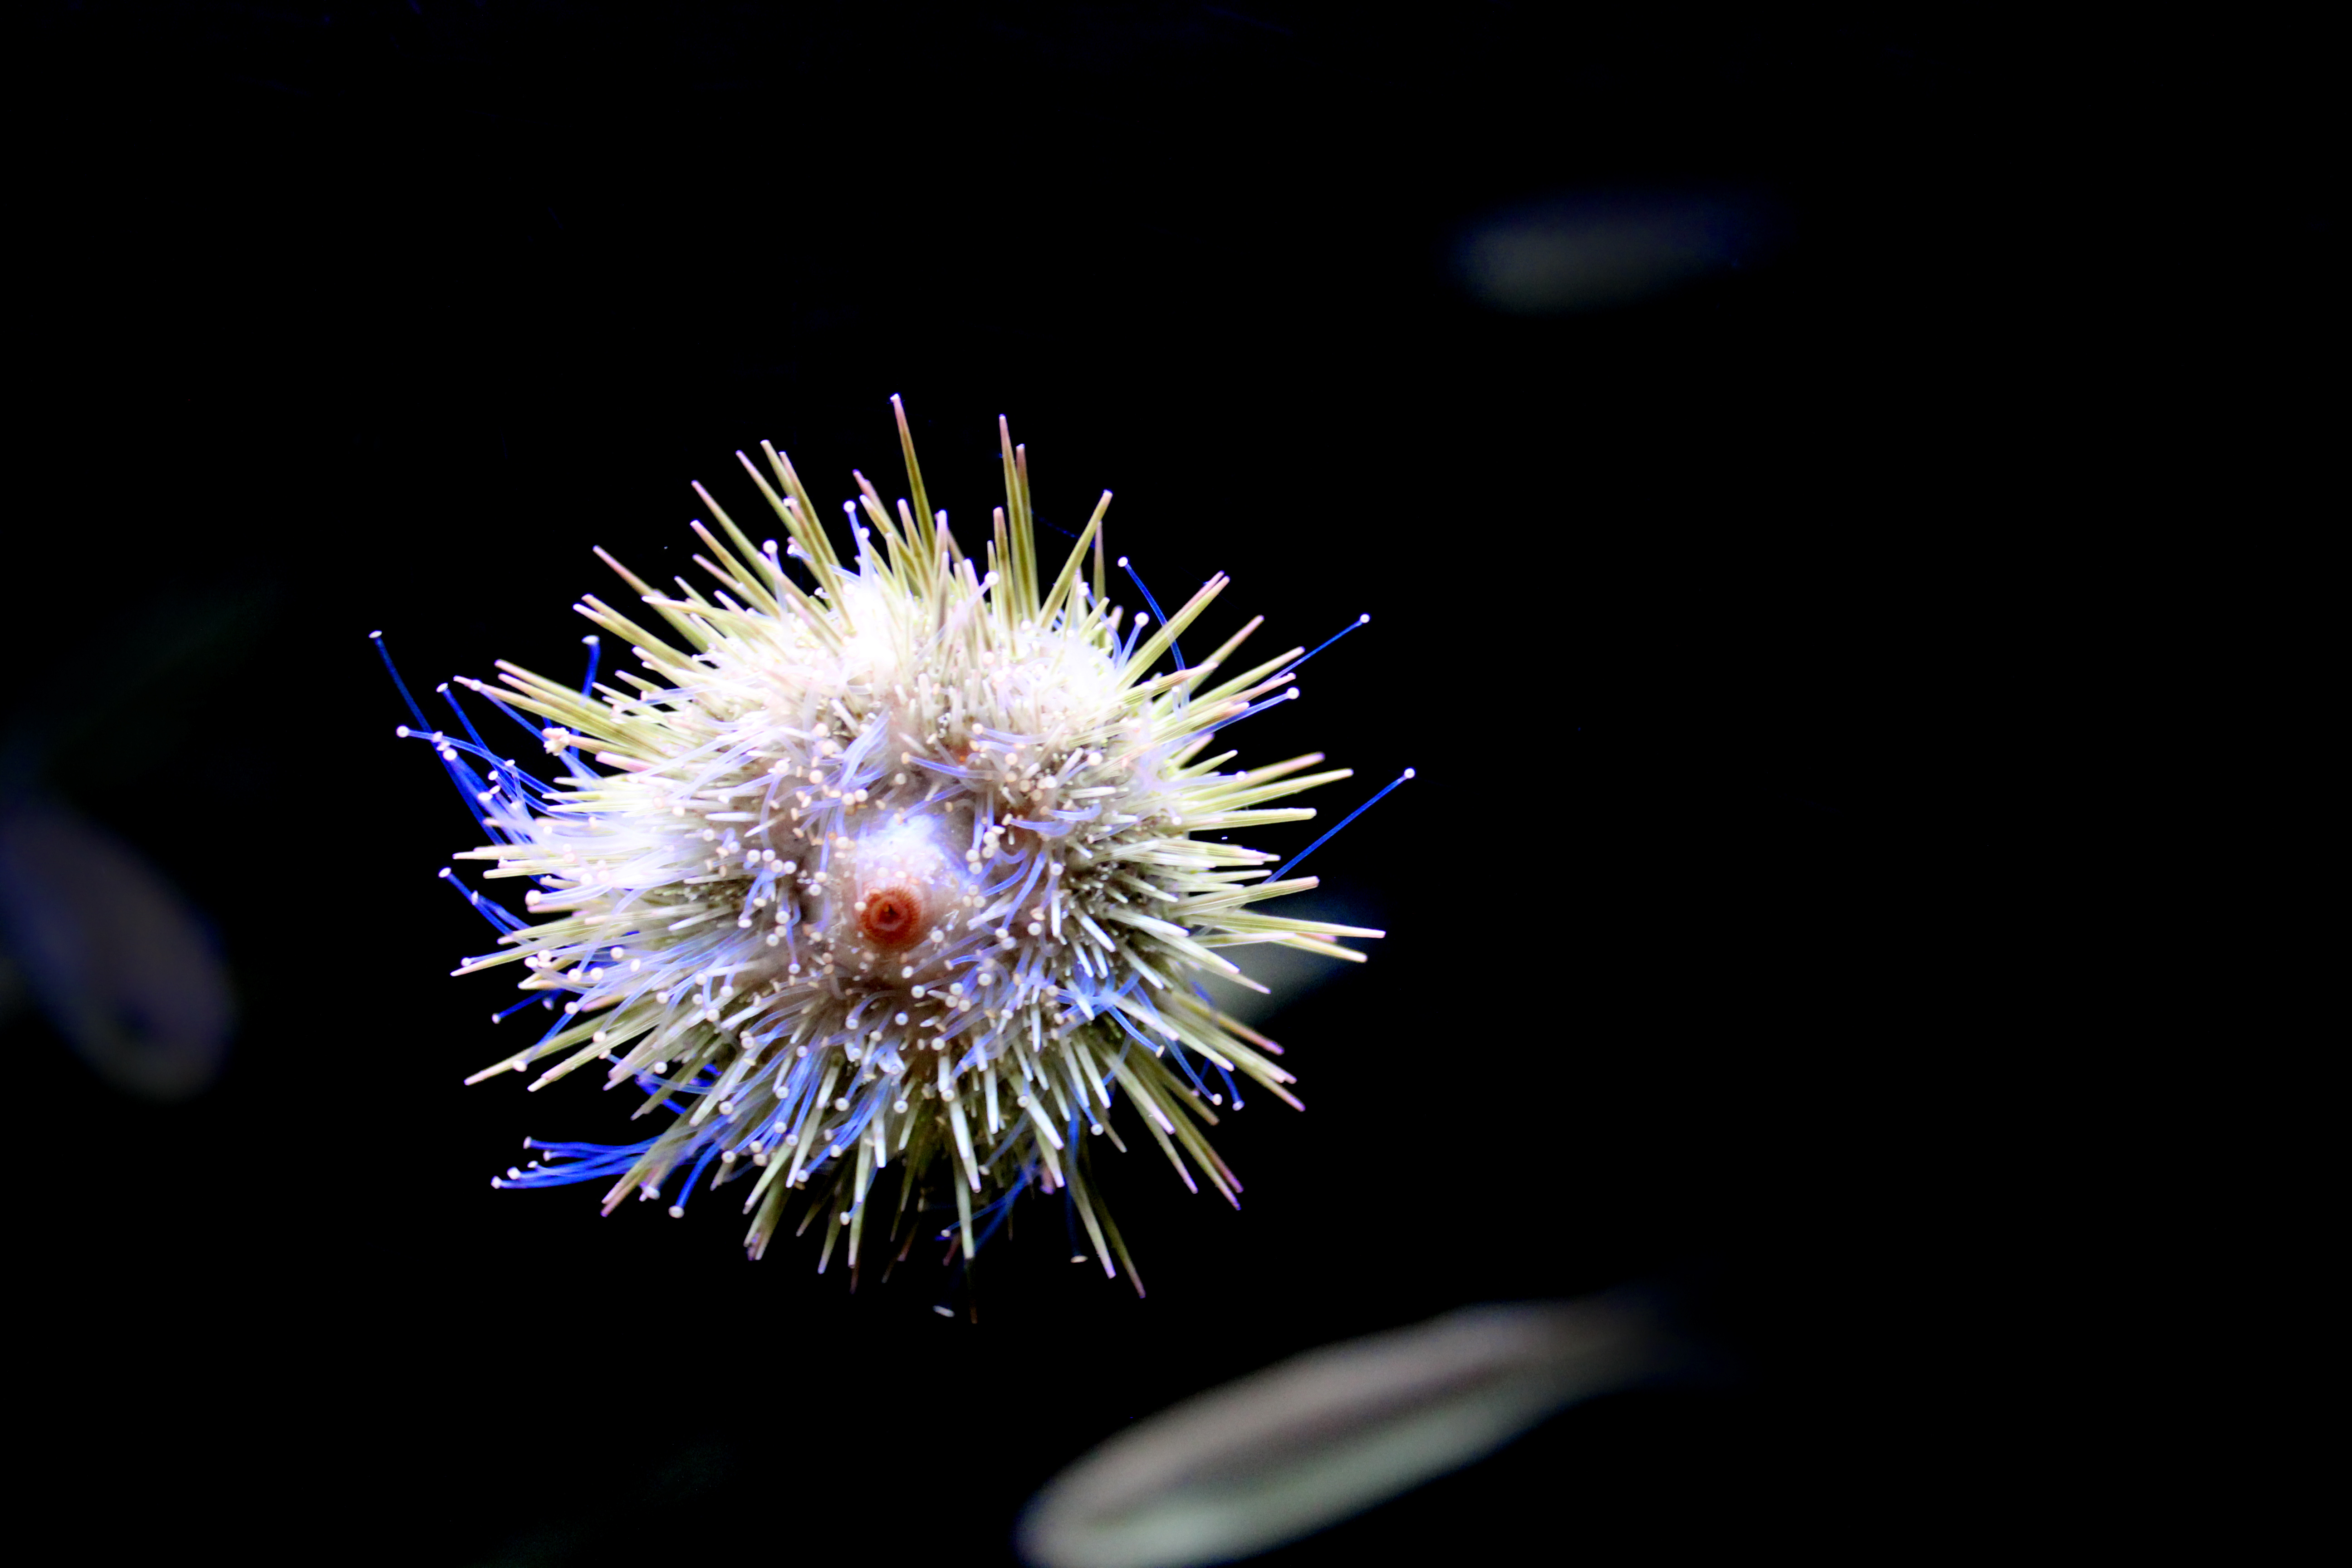 Tropical sea urchin - Underbelly view showing its mouth, America, Spiked, Pain, Photo, HQ Photo